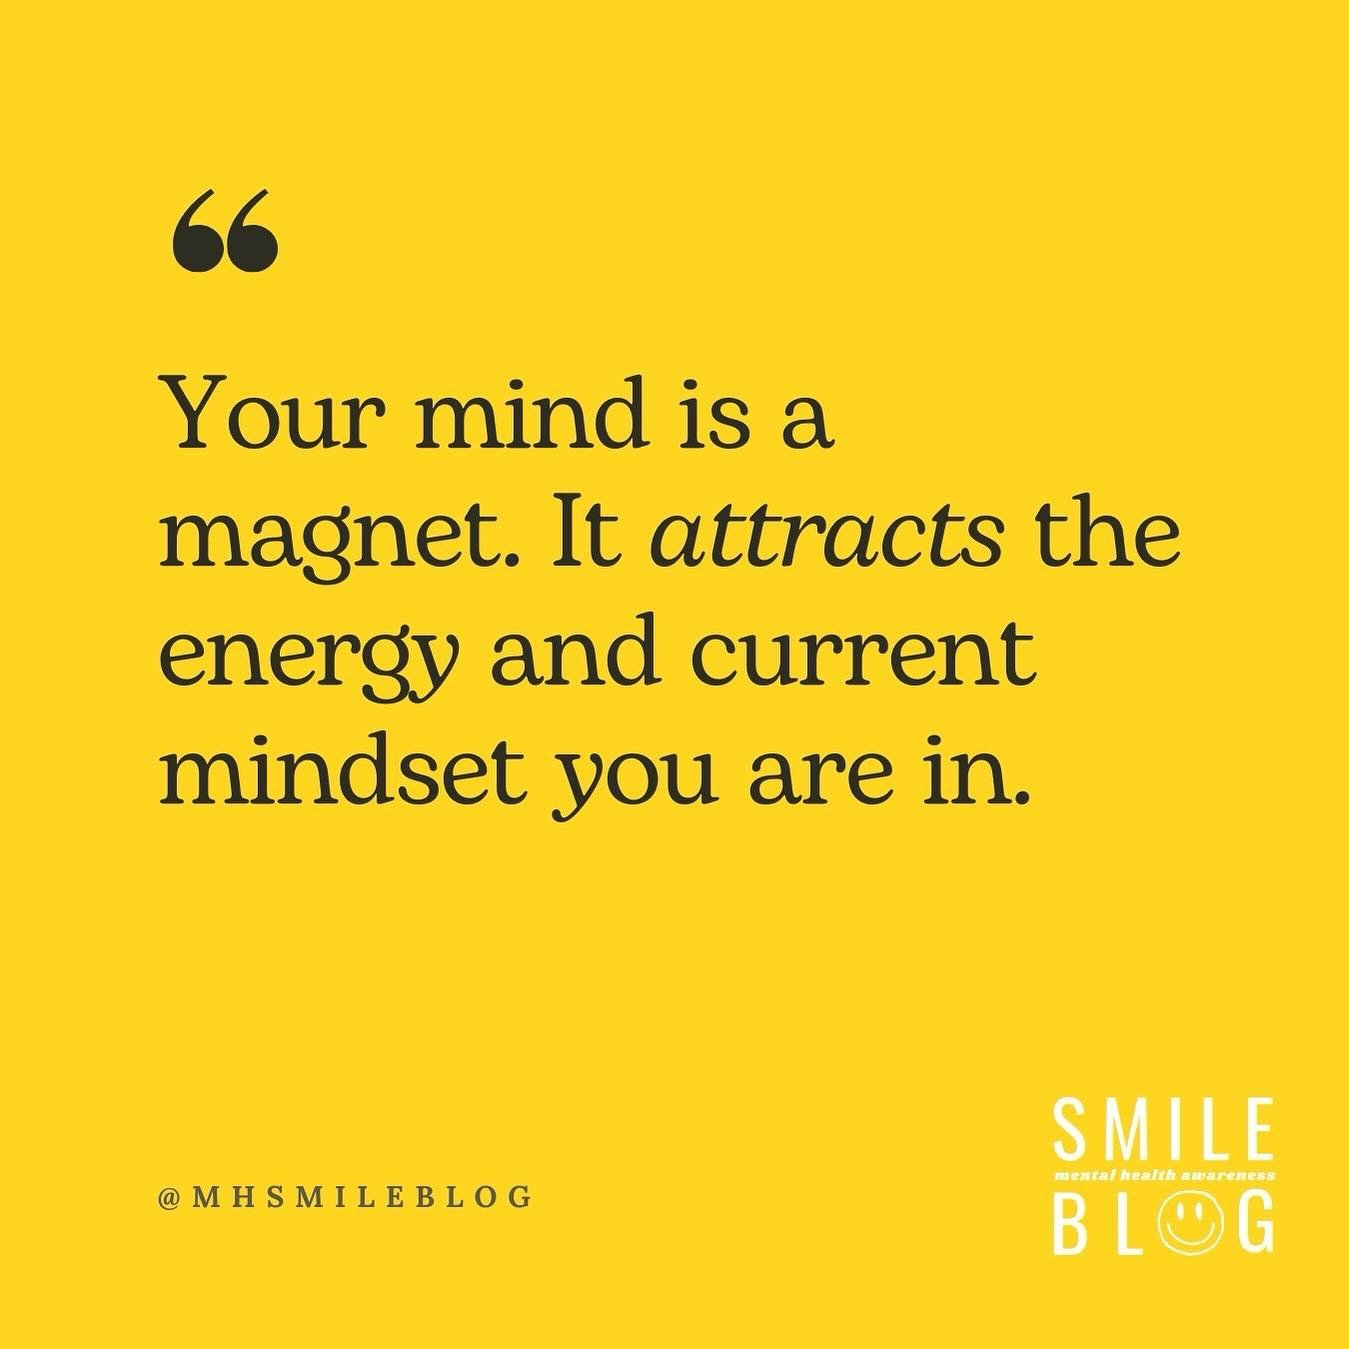 A reminder that your mindset plays a huge role in the energy you attract.

Have a great day⚡️🩵😁 
.
.
.
.
.
Want to learn more about us? Check us out @ mhsmileblog.com. Link is in bio

#selfcare #awareness #mentalhealthawareness #mentalhealthmatters